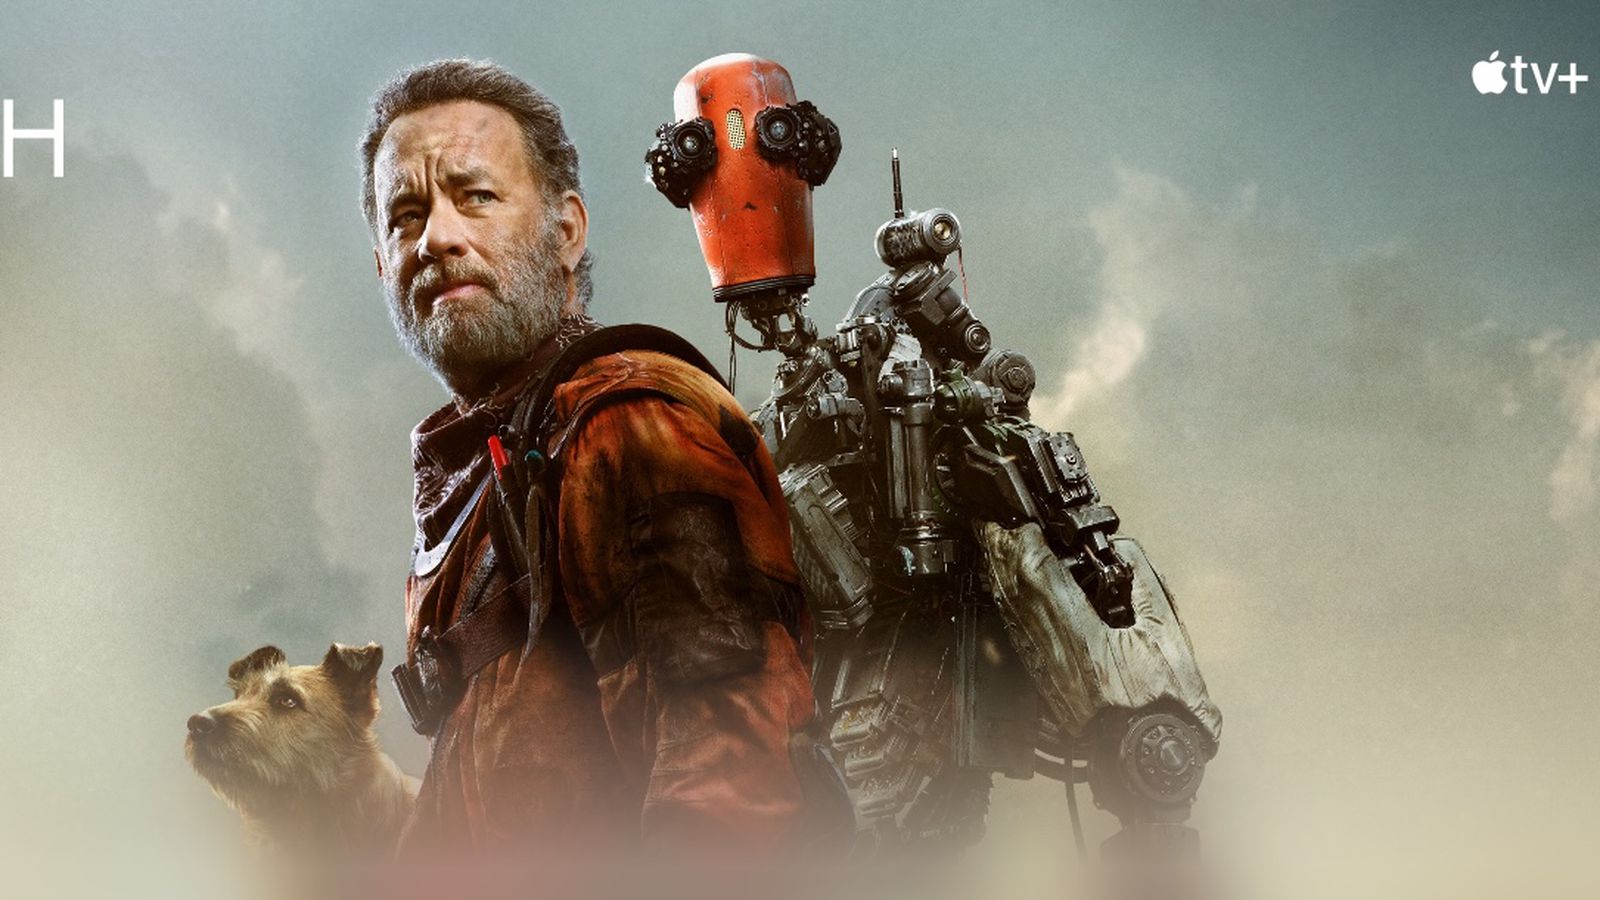 Tom Hanks to Star in Sci-Fi Film 'Finch' Headed to Apple TV+ Later